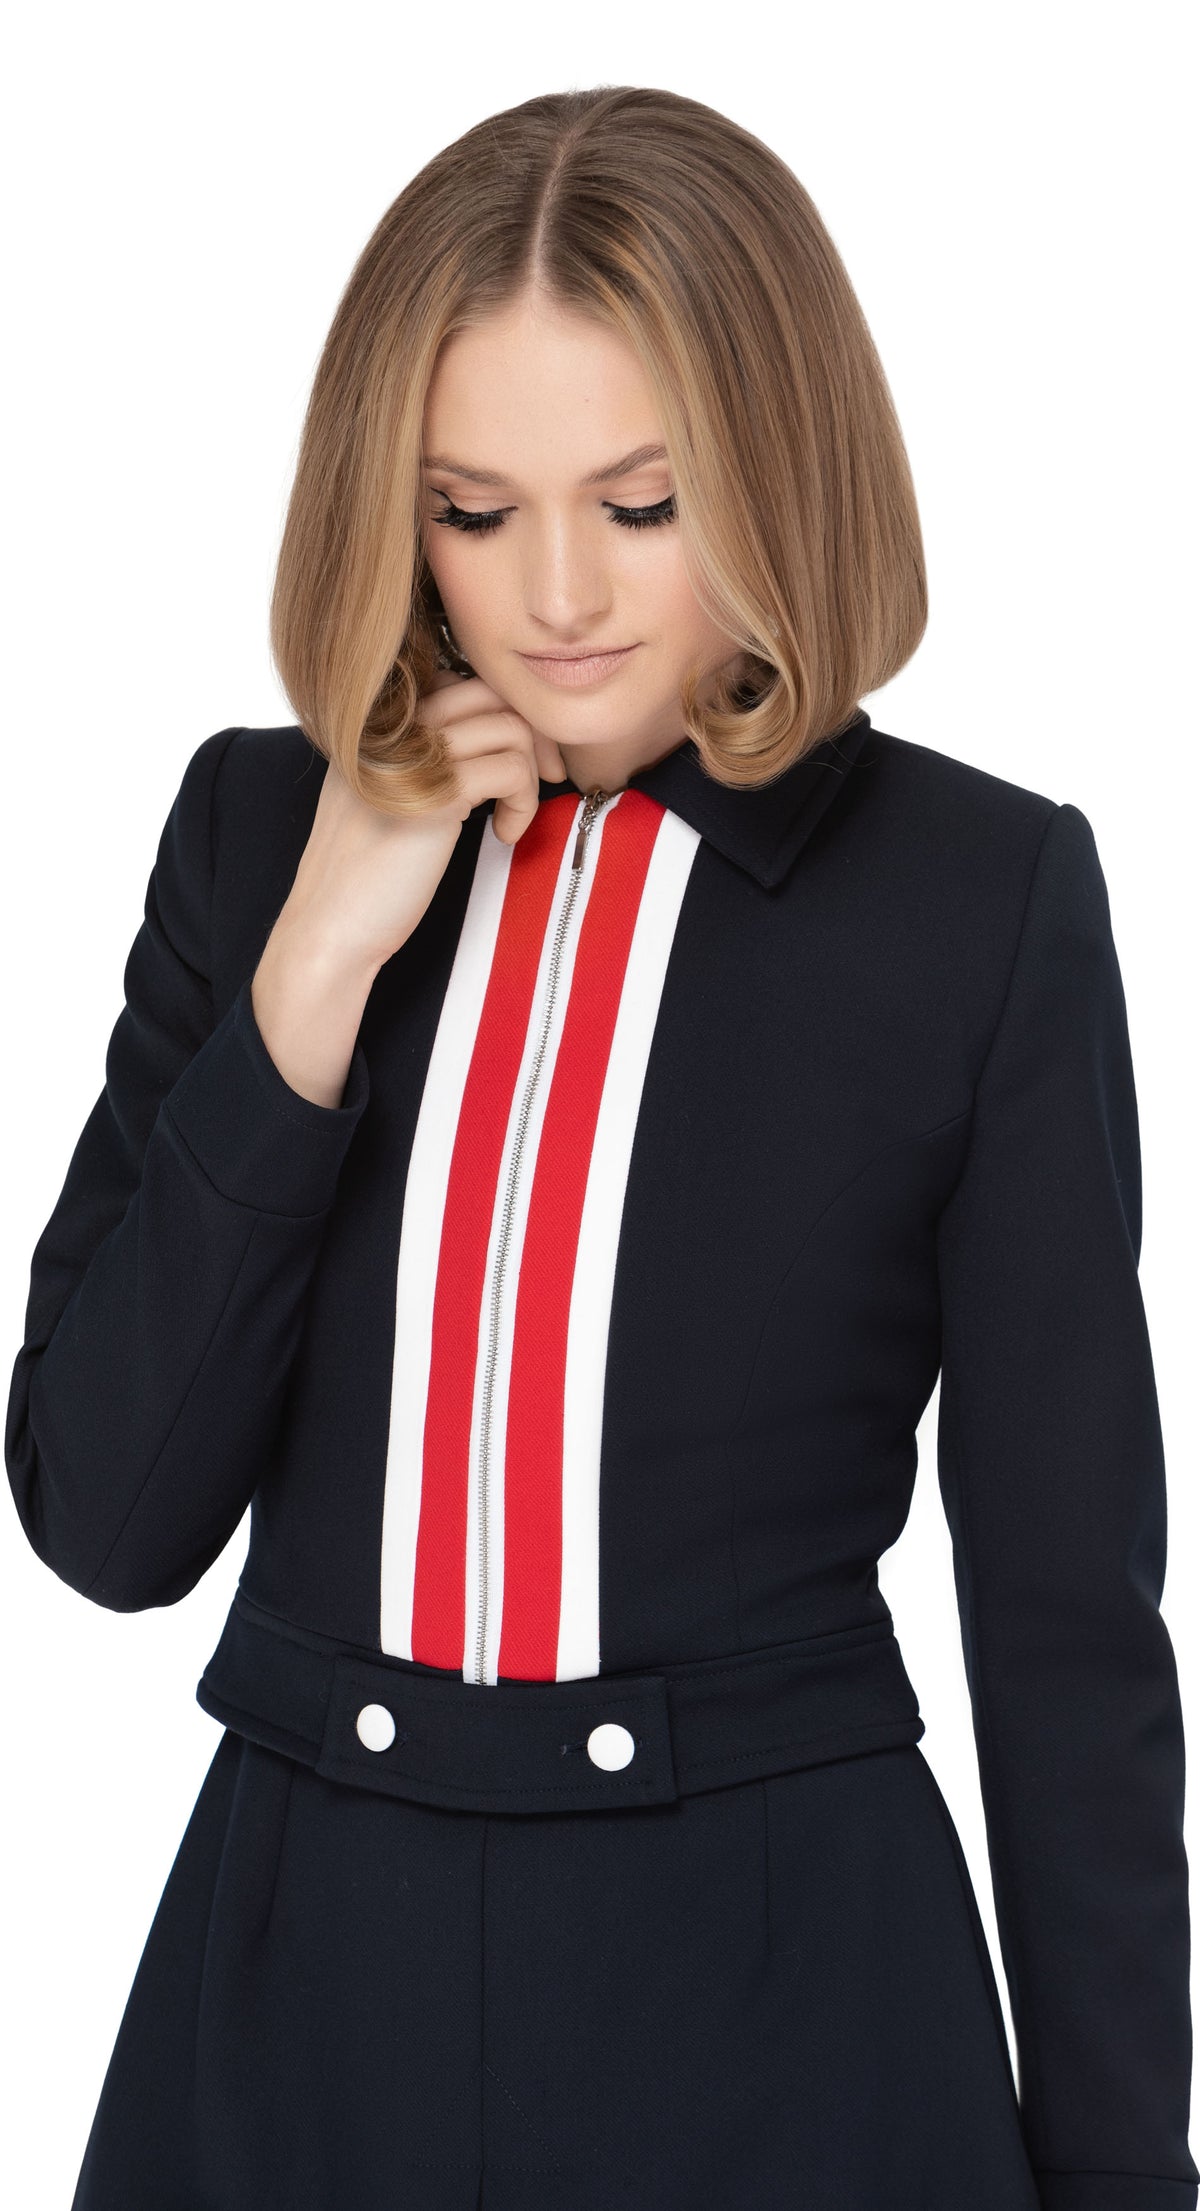 The perfect matching jacket for our sophisticated Mod Style Navy-Blue/Red/White Zippered Dress with Stripes or our Mod Style Navy-Blue/Red/White Zippered Skirt with Stripes. Crafted from the same Italian mill fabric as the dress and skirt, ensuring the perfect match in both color and texture. With a tailored fit and unique front zippered torso, this jacket perfectly complements the dress and skirt silhouette and detailing.